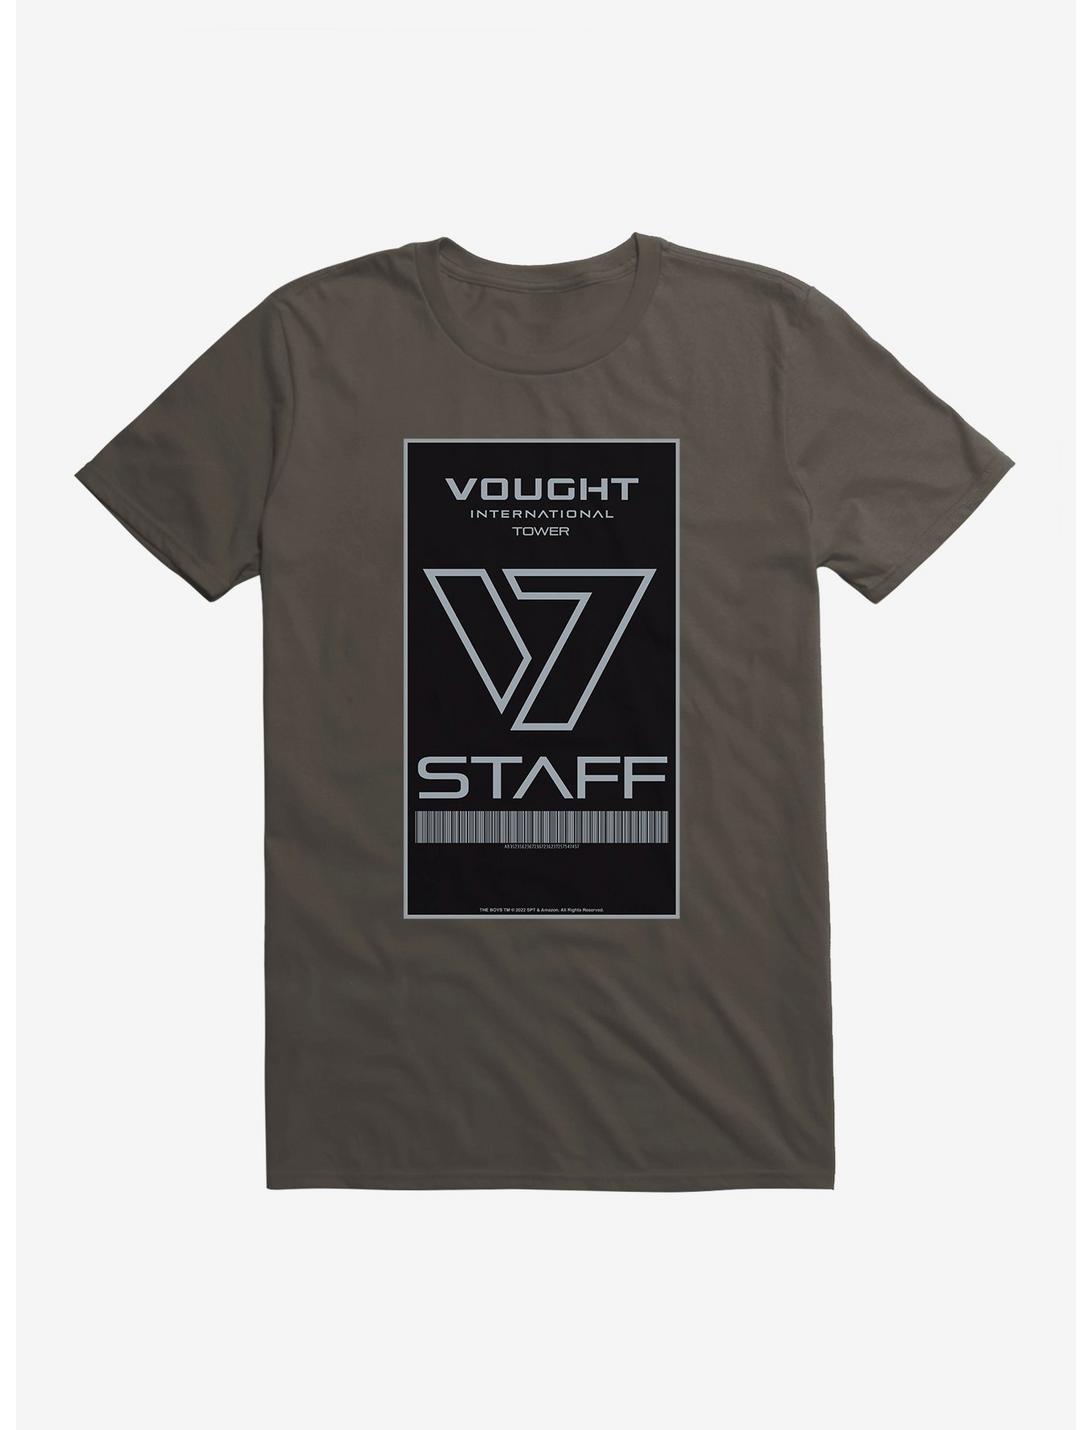 The Boys Vought Intl Tower Staff Badge T-Shirt, , hi-res